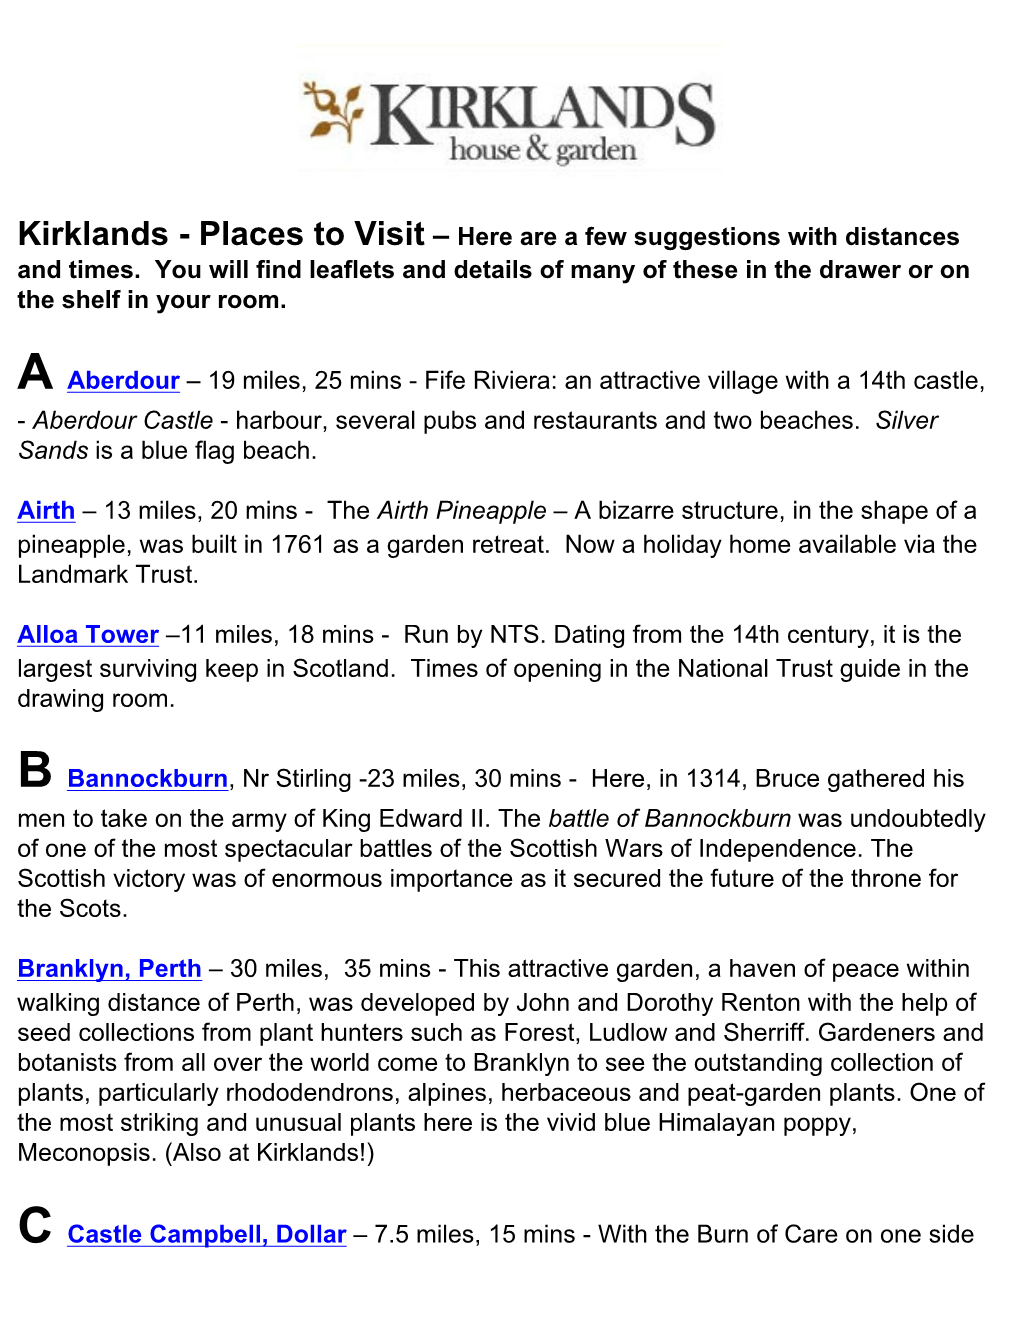 Places to Visit – Here Are a Few Suggestions with Distances and Times